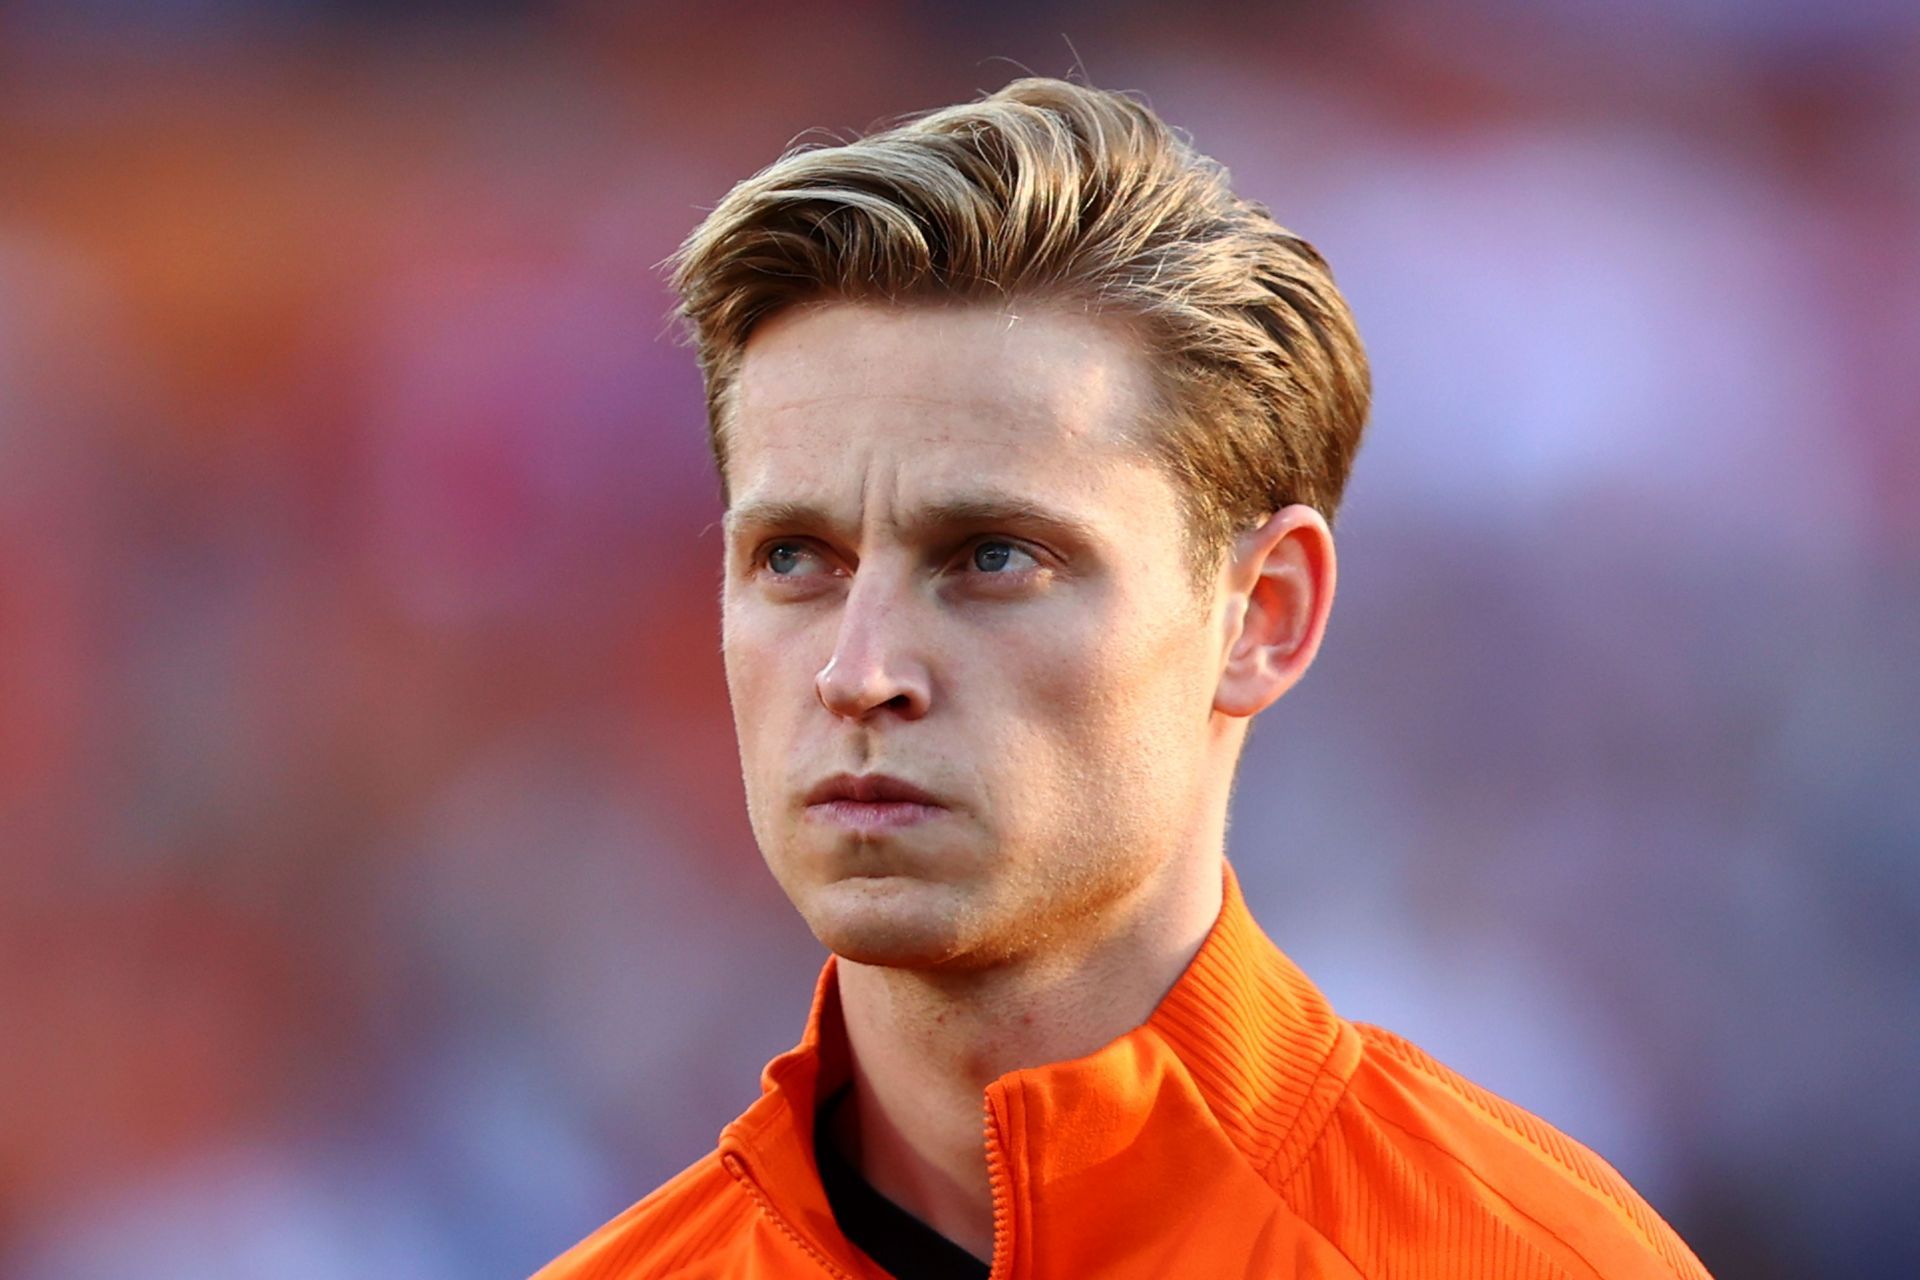 Frenkie de Jong is one step away from arriving at Old Trafford